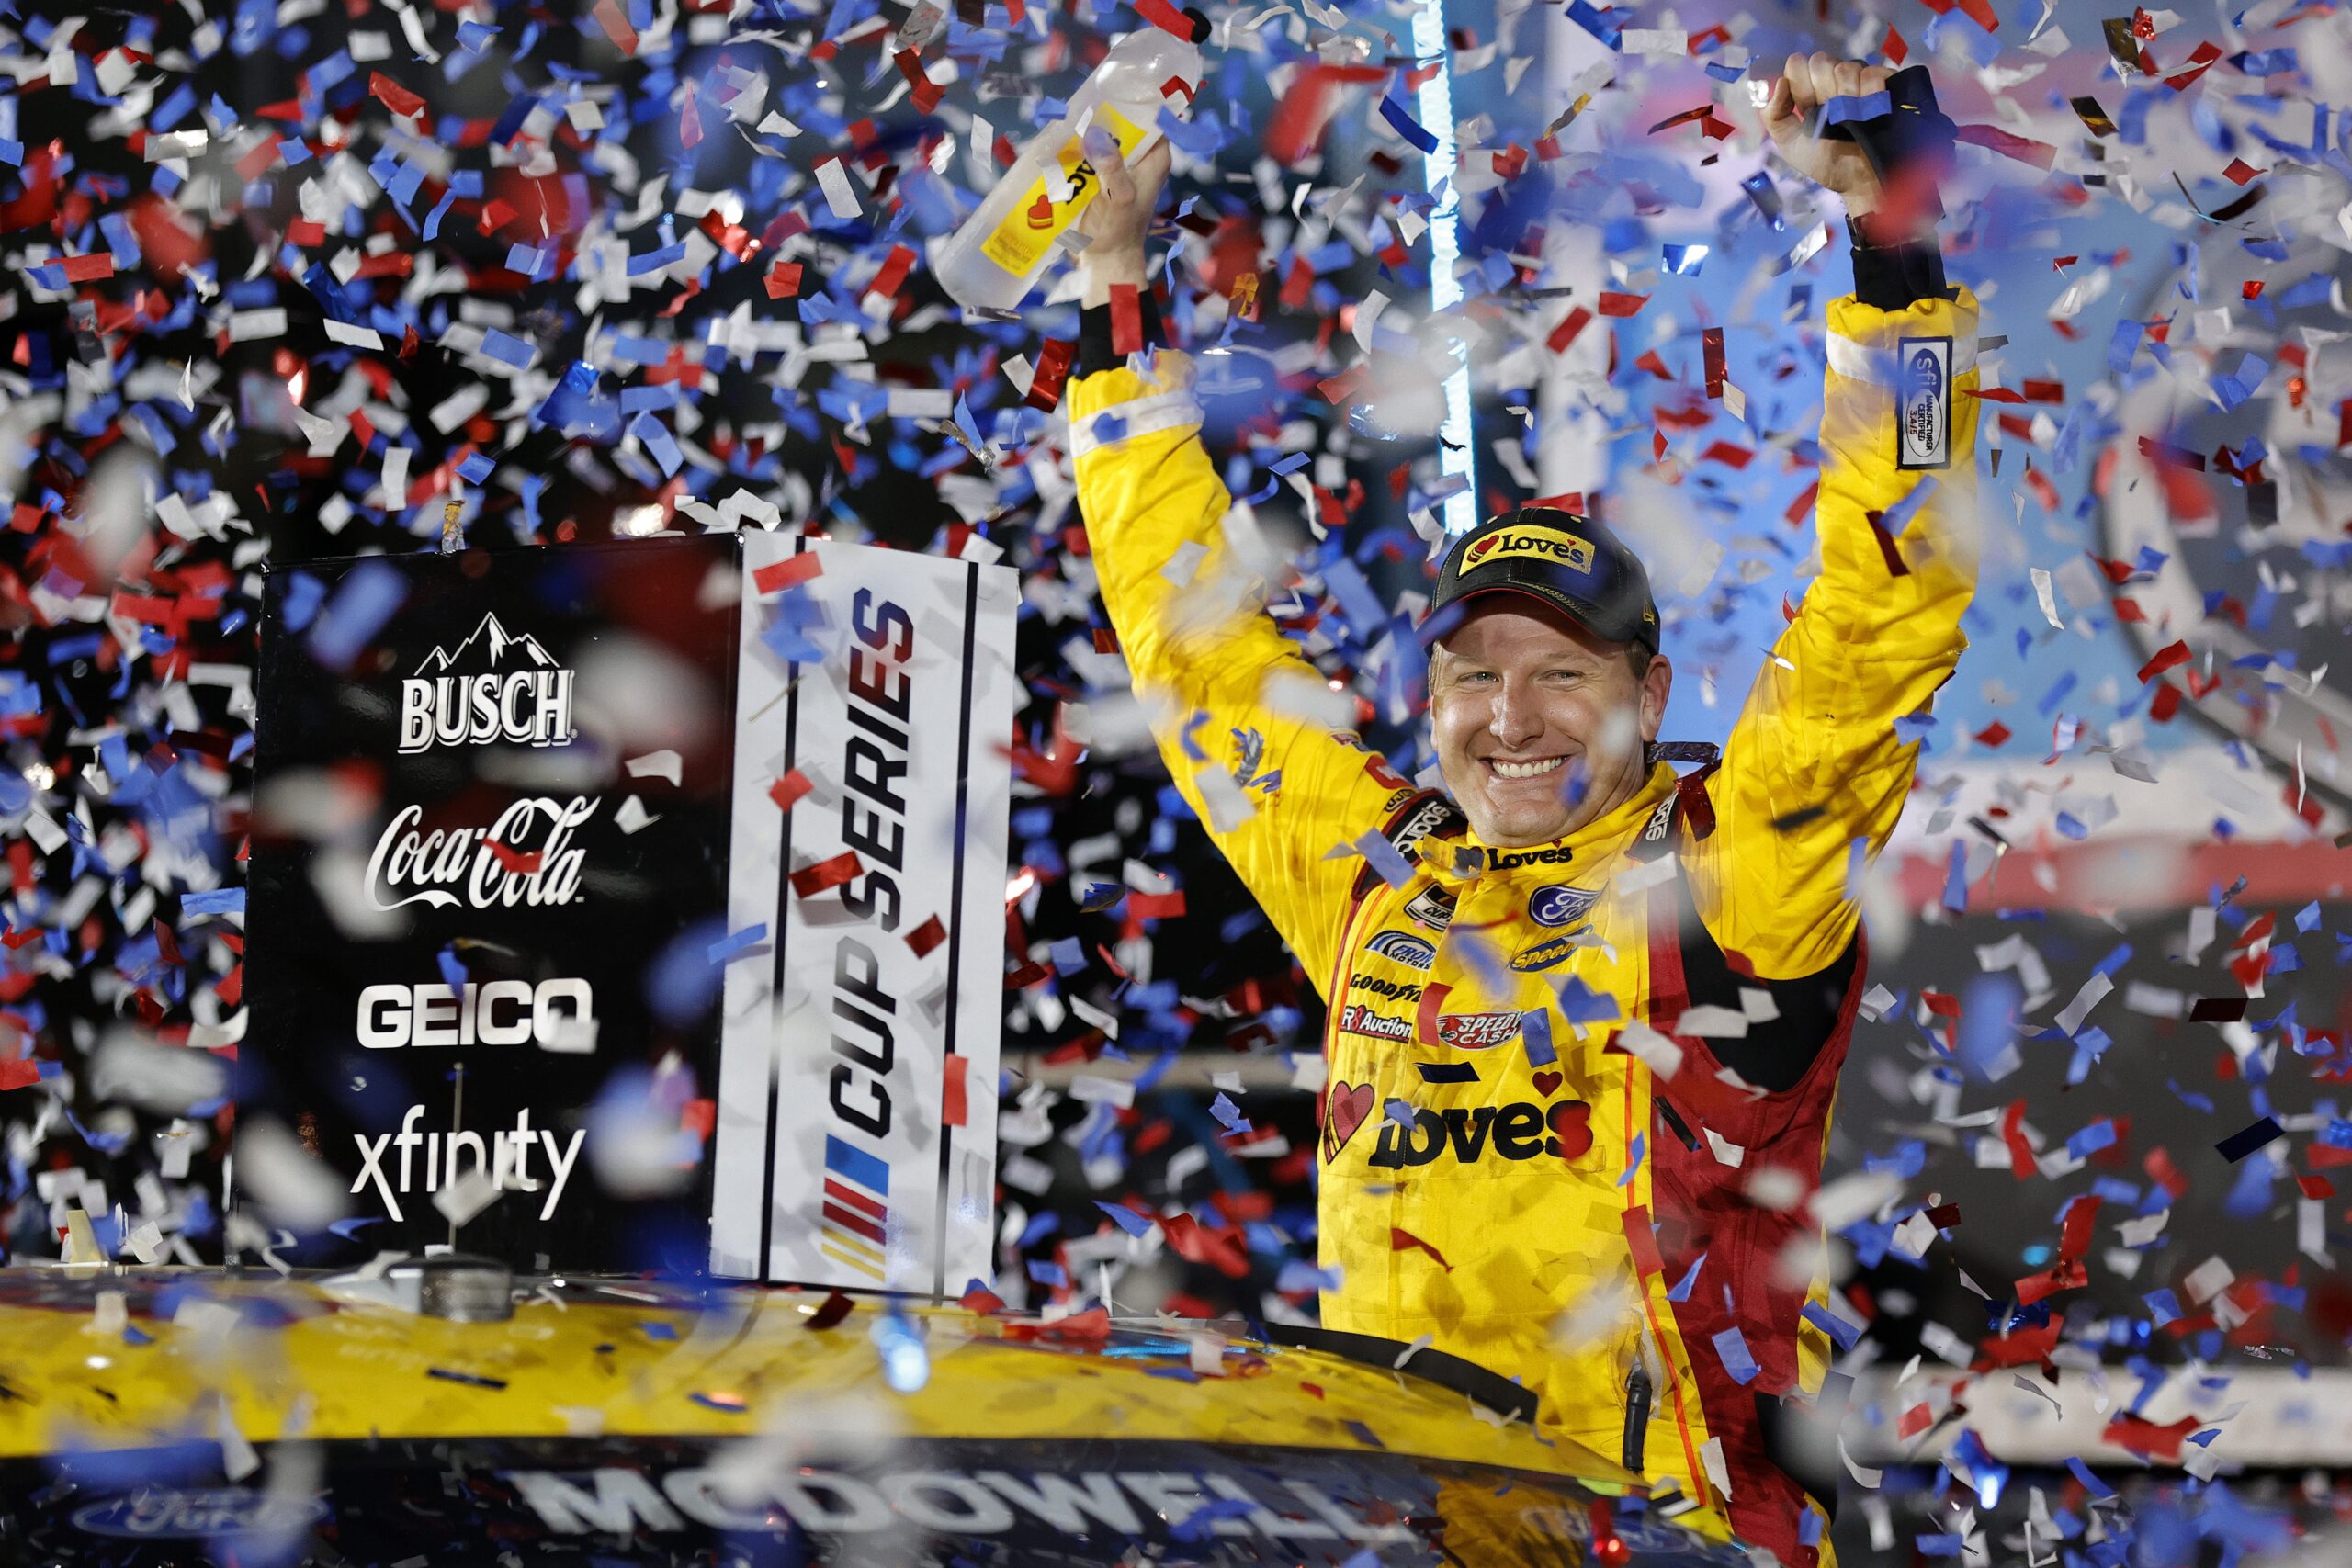 Perhaps the newest people's champion is Michael McDowell. (Photo: Jared C. Tilton/Getty Images)